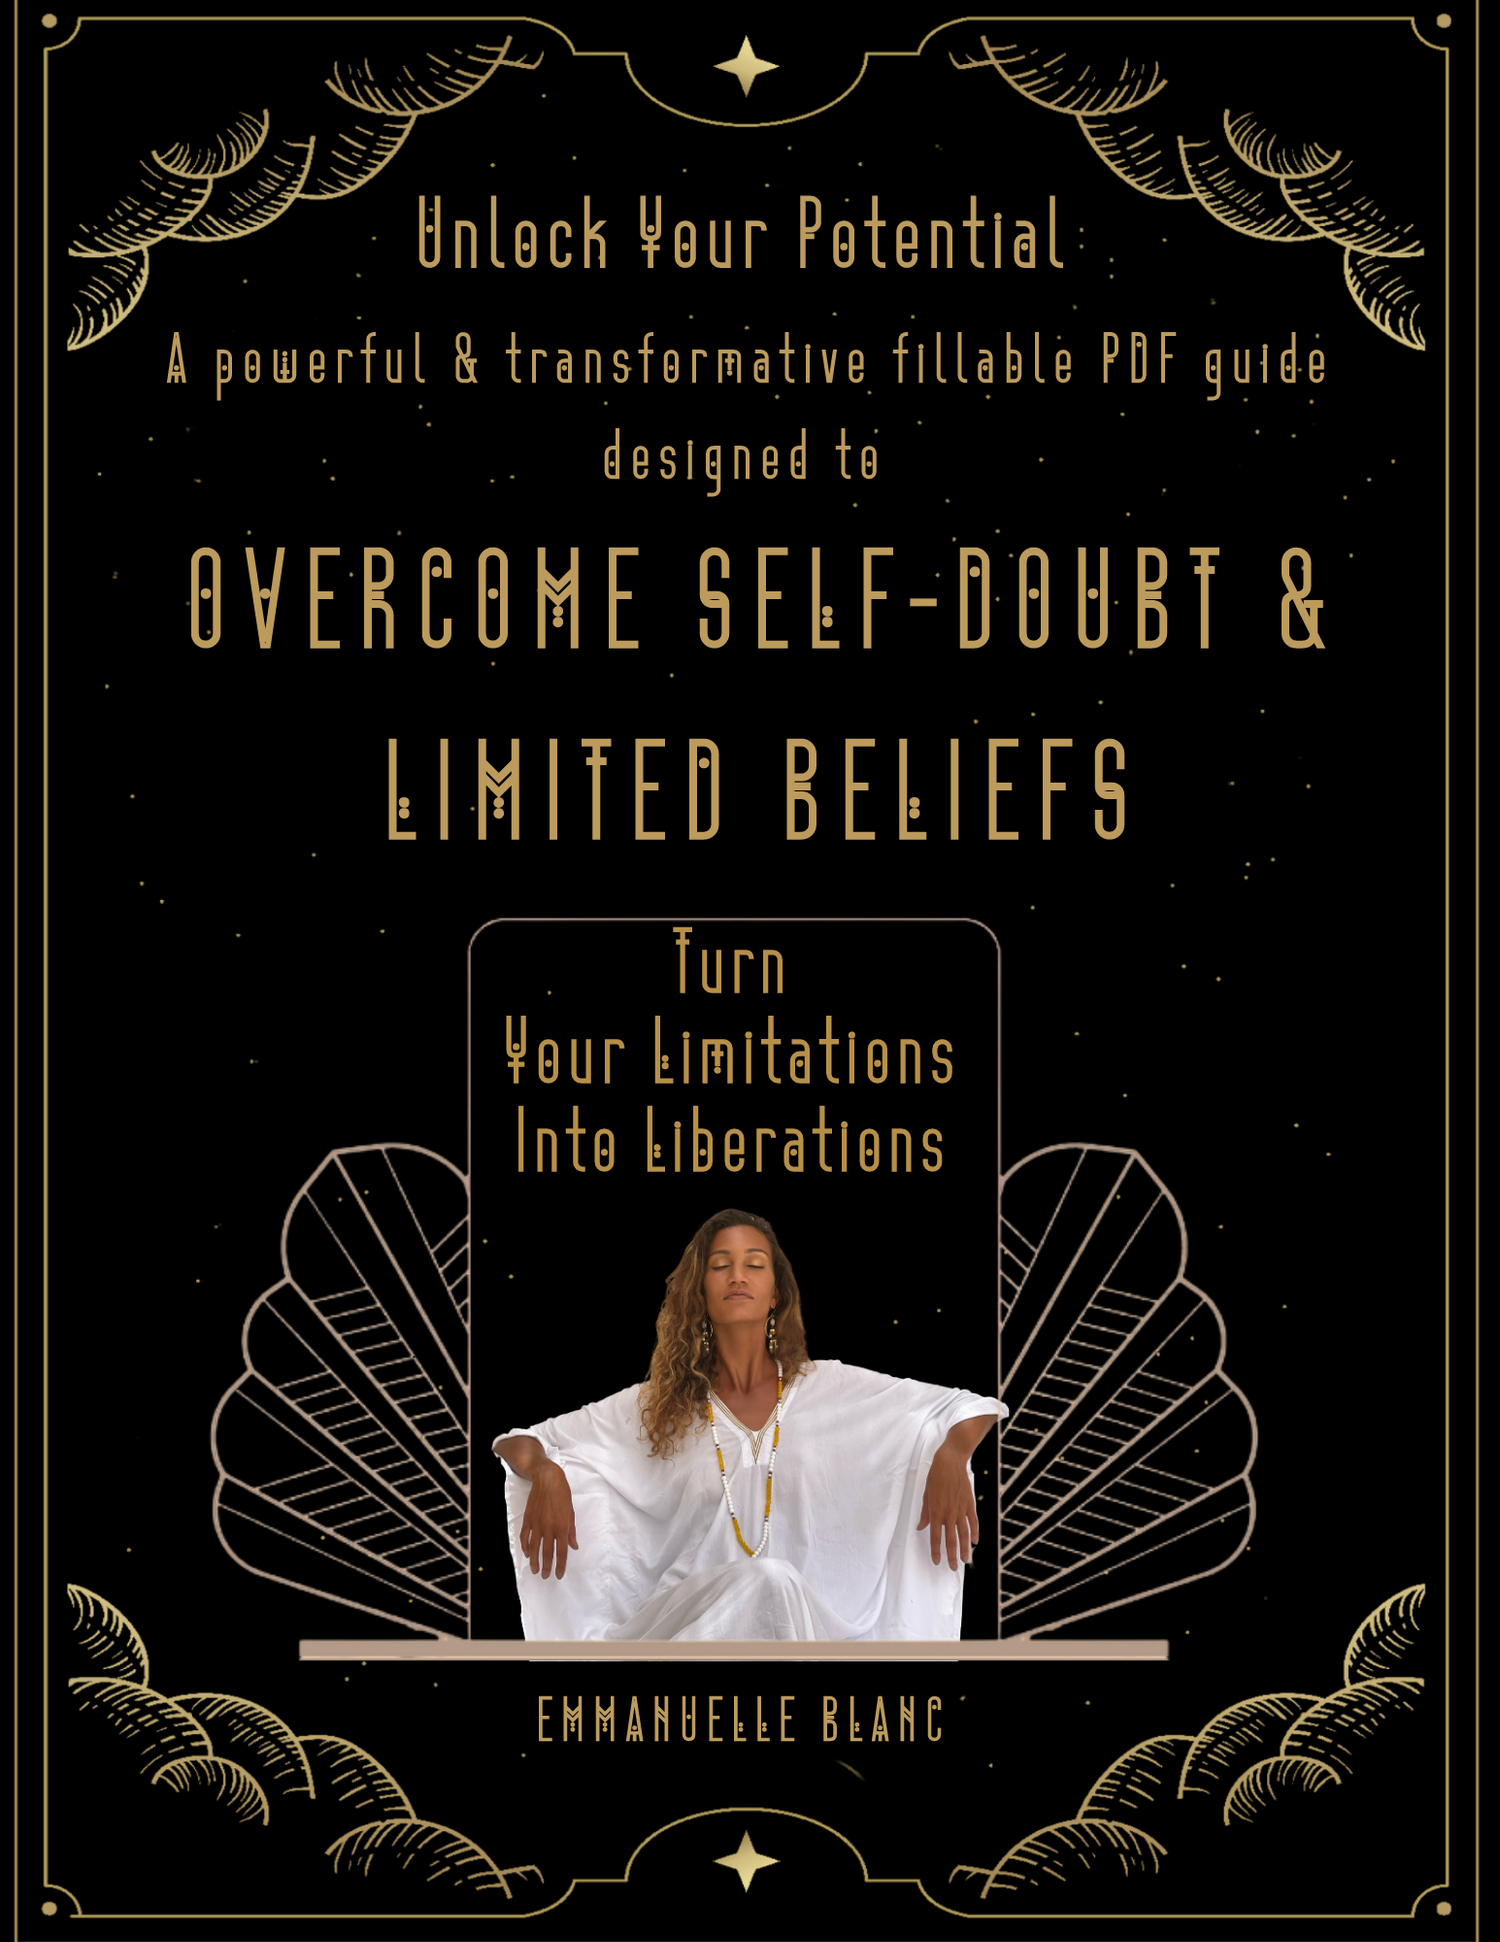 OVERCOME SELF-DOUBT &amp; LIMITED BELIEFS